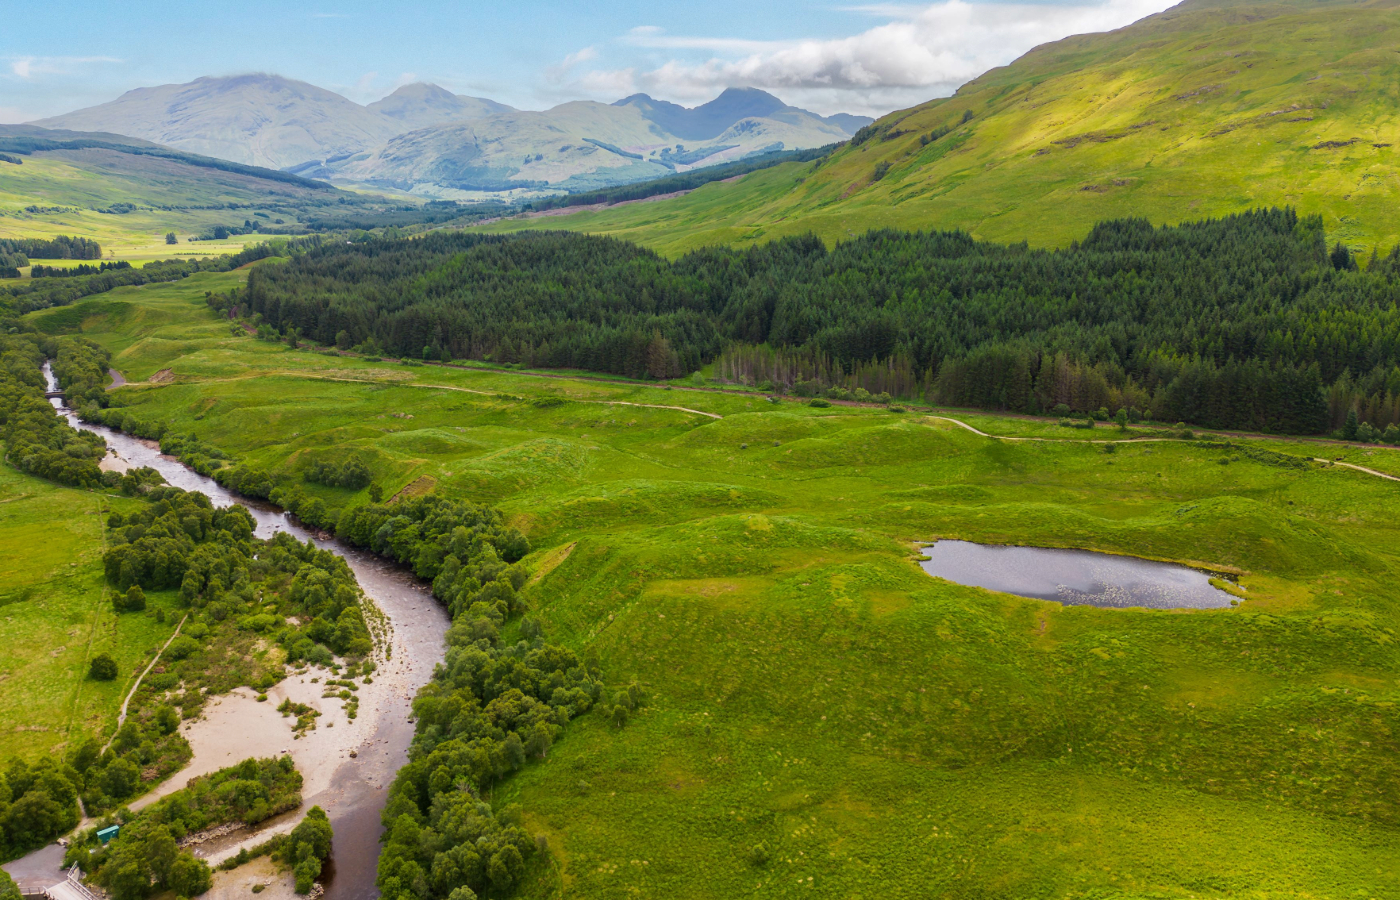 Auchreoch, Tyndrum, Crianlarich is for sale through Galbraith at offers over £2m as a whole or in two lots.